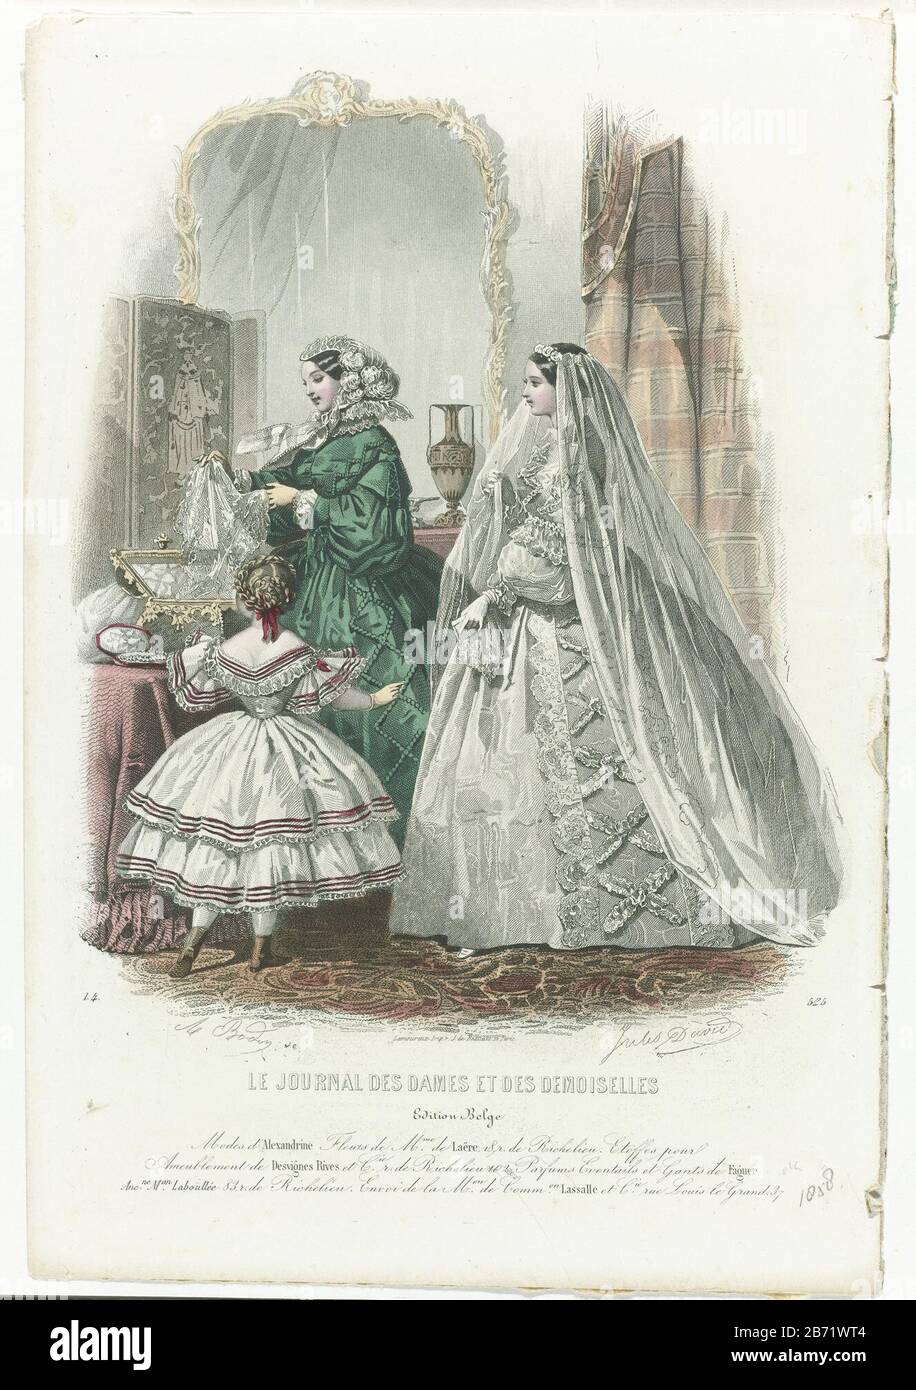 Le Journal des Dames et des Demoiselles, 1858, 14, No 525 Edition Belge, Modes () A bride, woman and girl around a corbeille de mariage 'or bride basket. Left: 'toilette' for a girl of eight to ten years old. Gown 'tarlatane' decorated with 'petits velvet. Bodice adorned with lace and berthe. Middle: 'toilette de ville'. Gown of taffeta, decorated with strings and tassels of silk and chenille. 'Chapeau Marie-Stuart' of white crepe, decorated with Blonde (bobbin side) and feathers, slippage of taffeta. Right: 'toilette de mariée. Wedding gown of 'moire antique', decorated with lace. According t Stock Photo